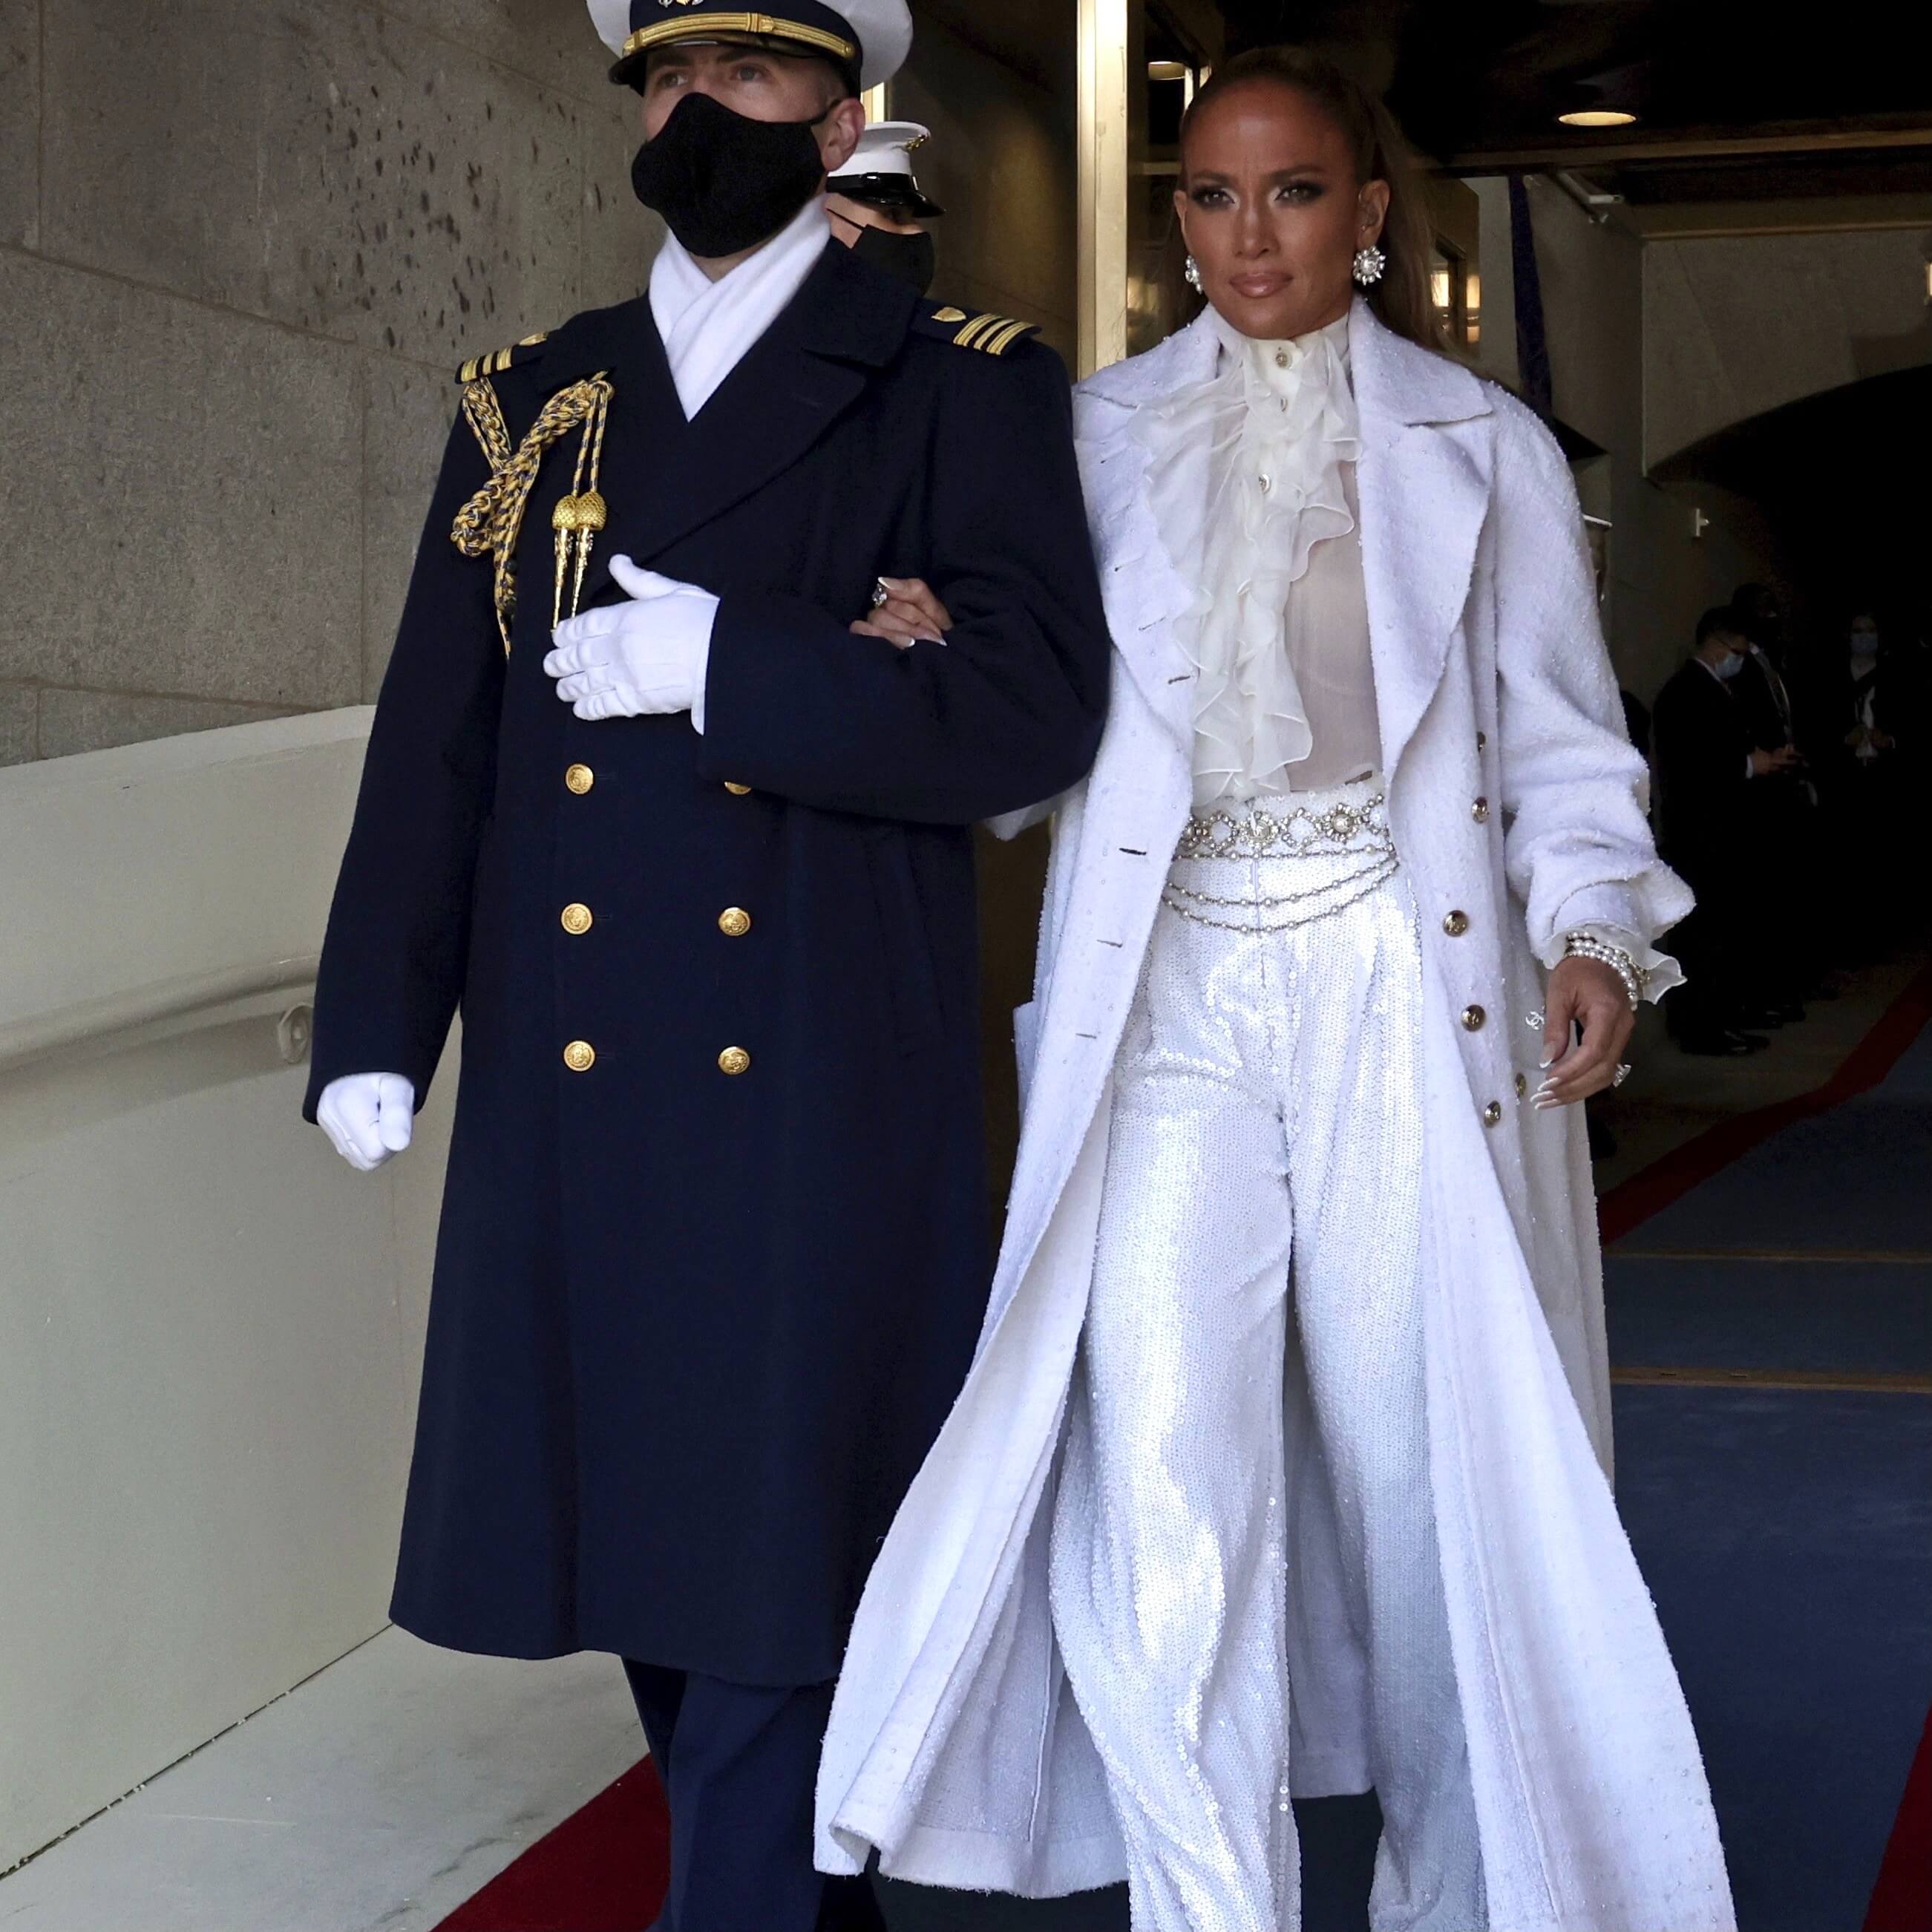 The most outstanding outfits from the inauguration ceremony of Joe Biden